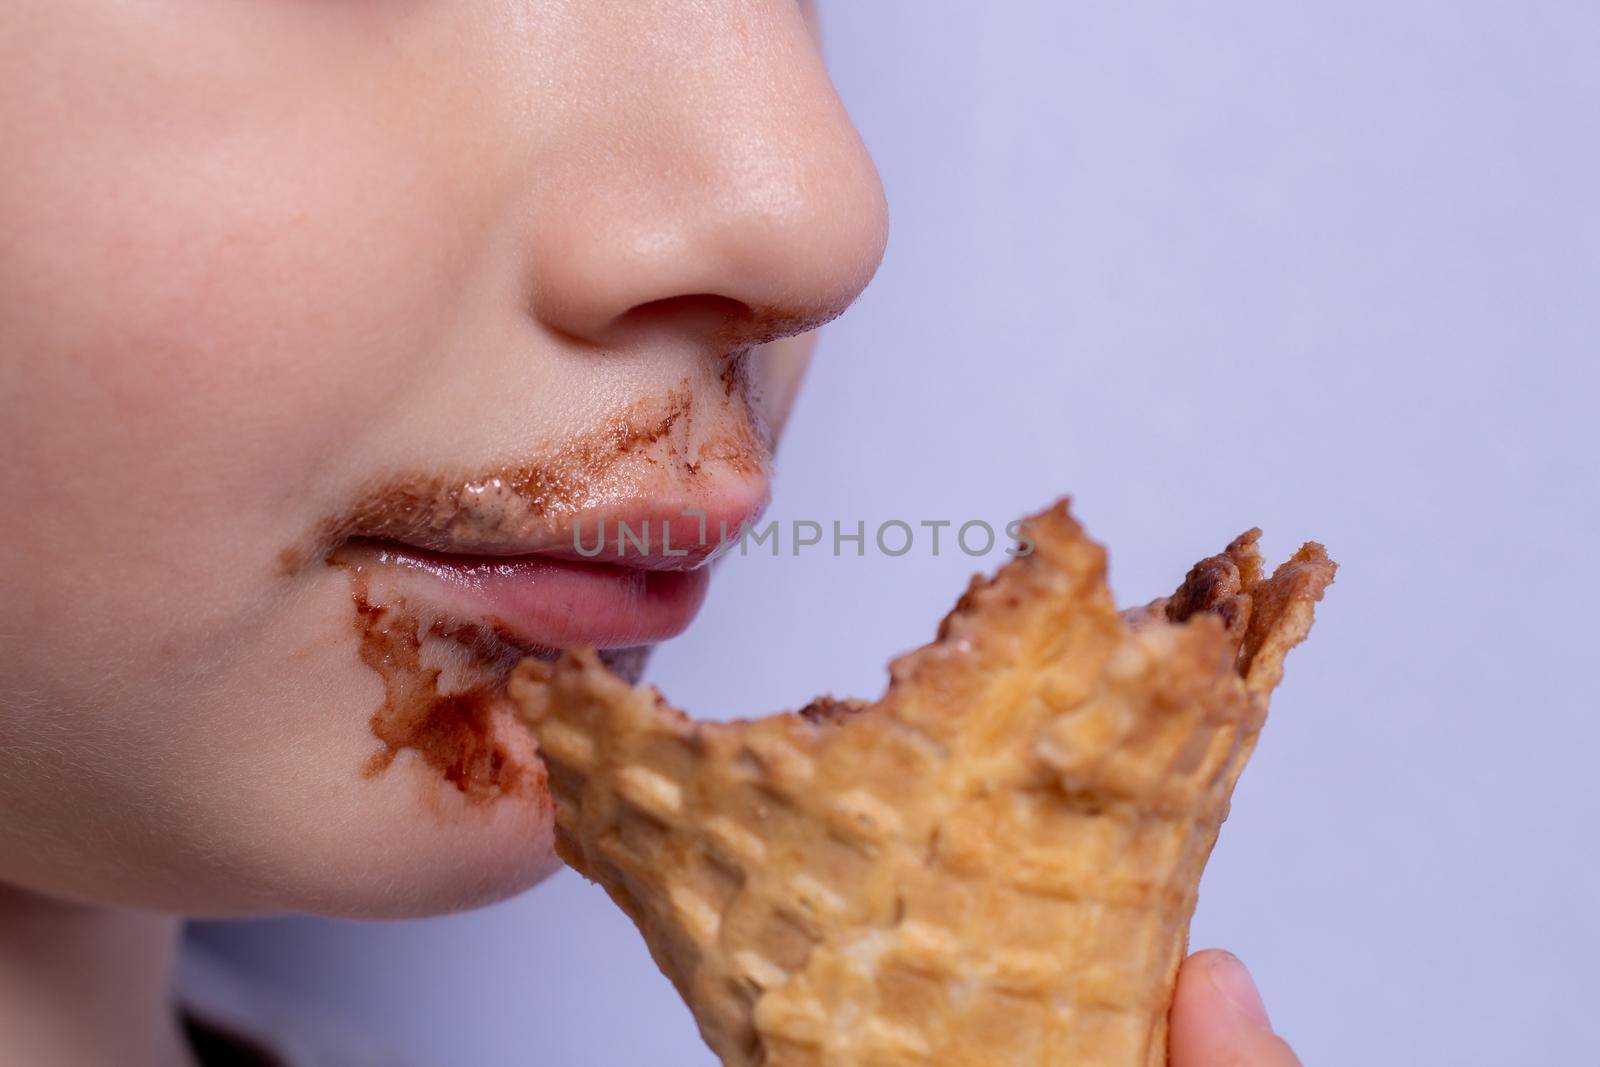 image of a boy eating chocolate ice cream close-up by bySergPo